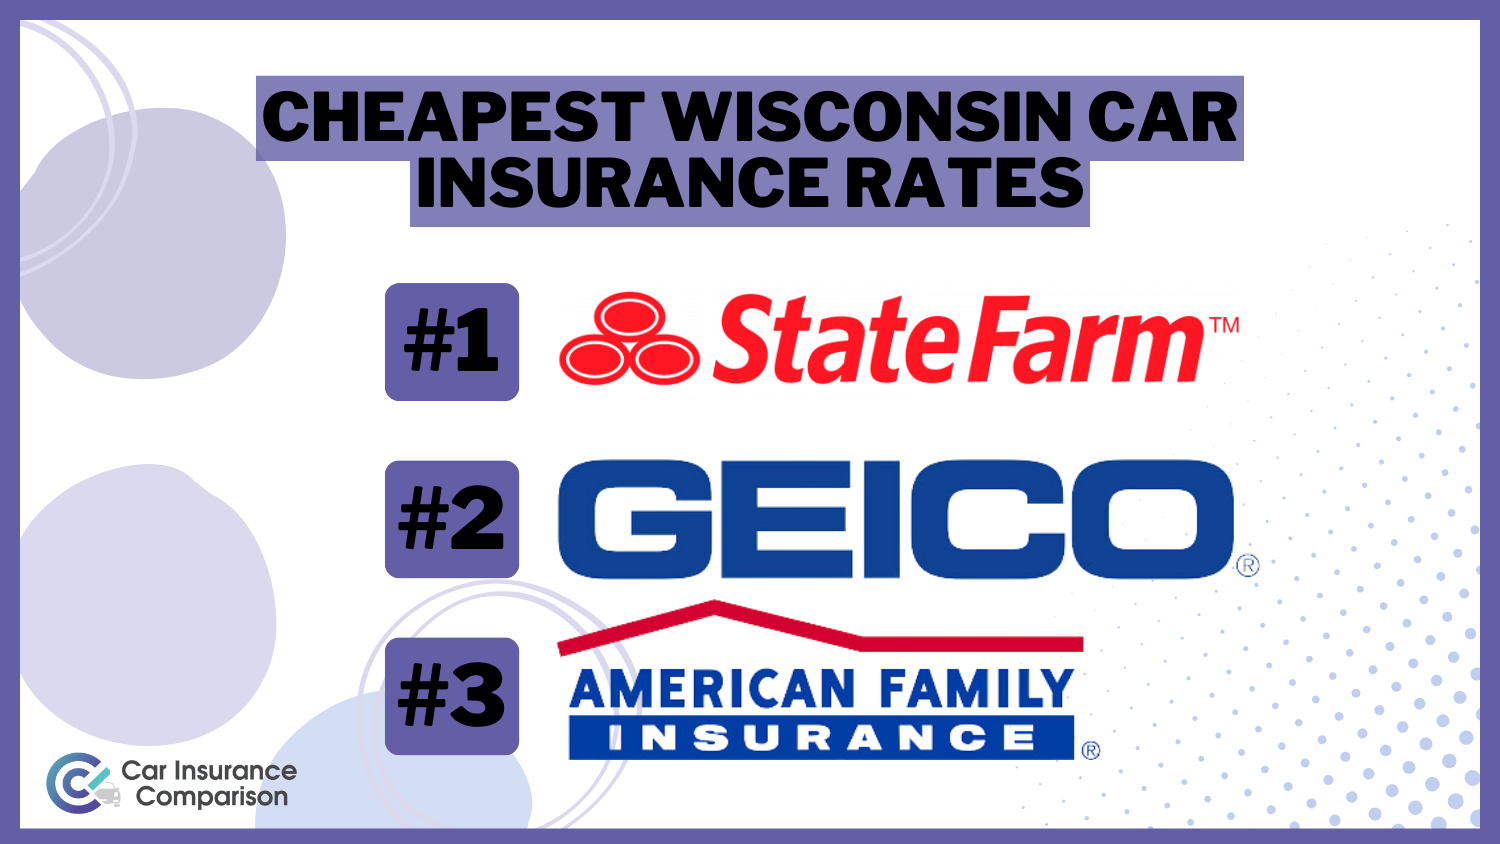 Cheapest Wisconsin Car Insurance Rates: State Farm, Geico, American Family